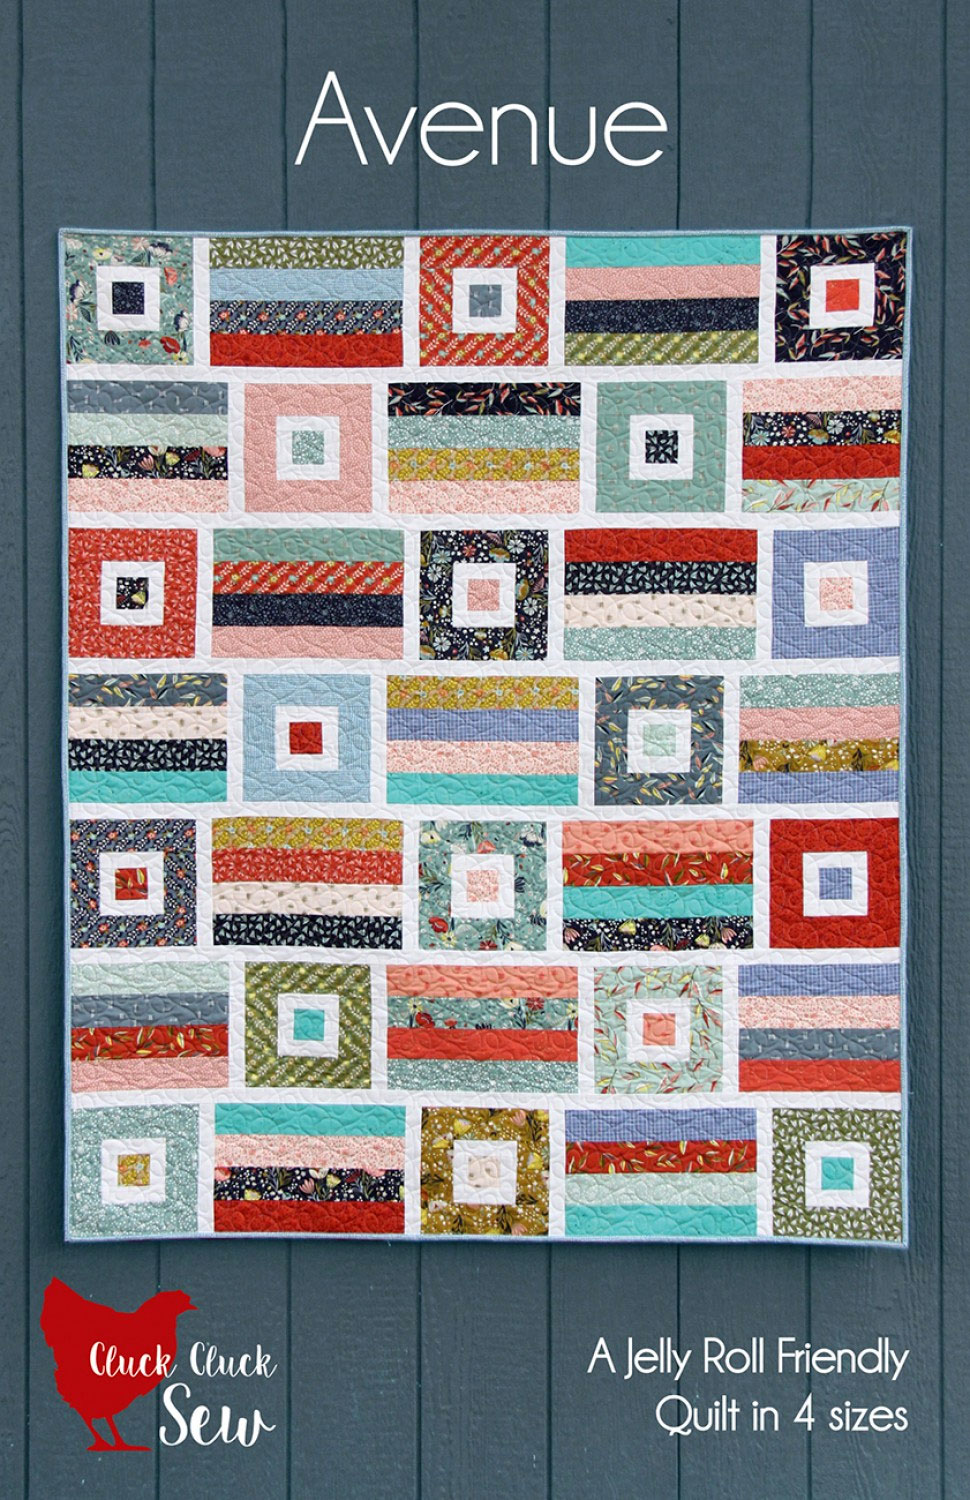 Avenue-quilt-sewing-pattern-Cluck-Cluck-Sew-front